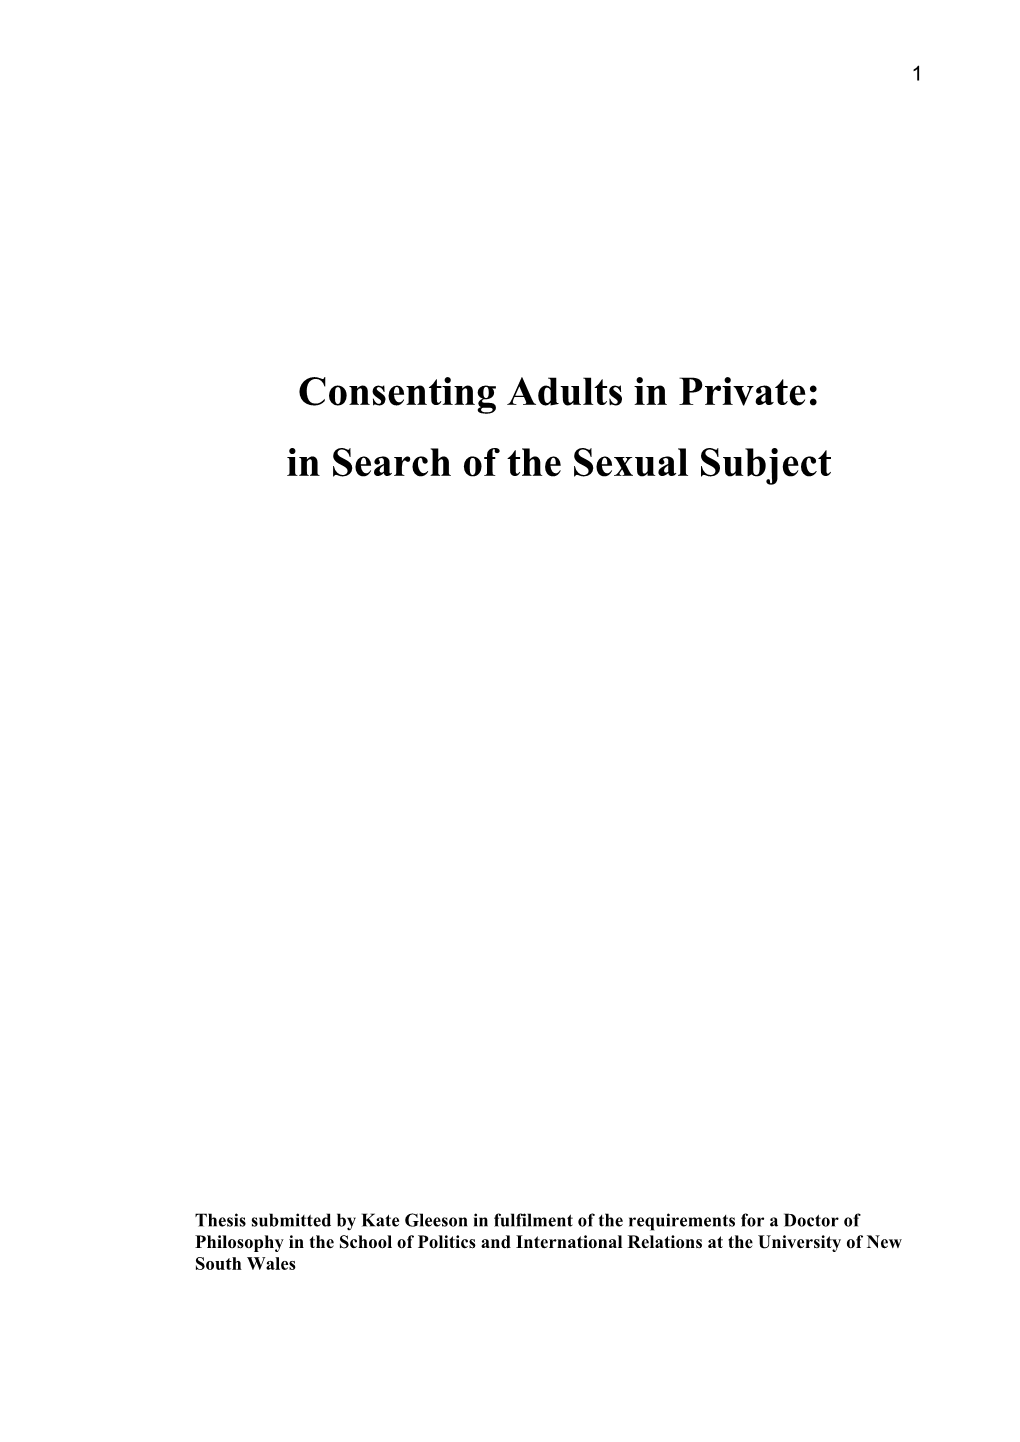 Consenting Adults in Private: in Search of the Sexual Subject